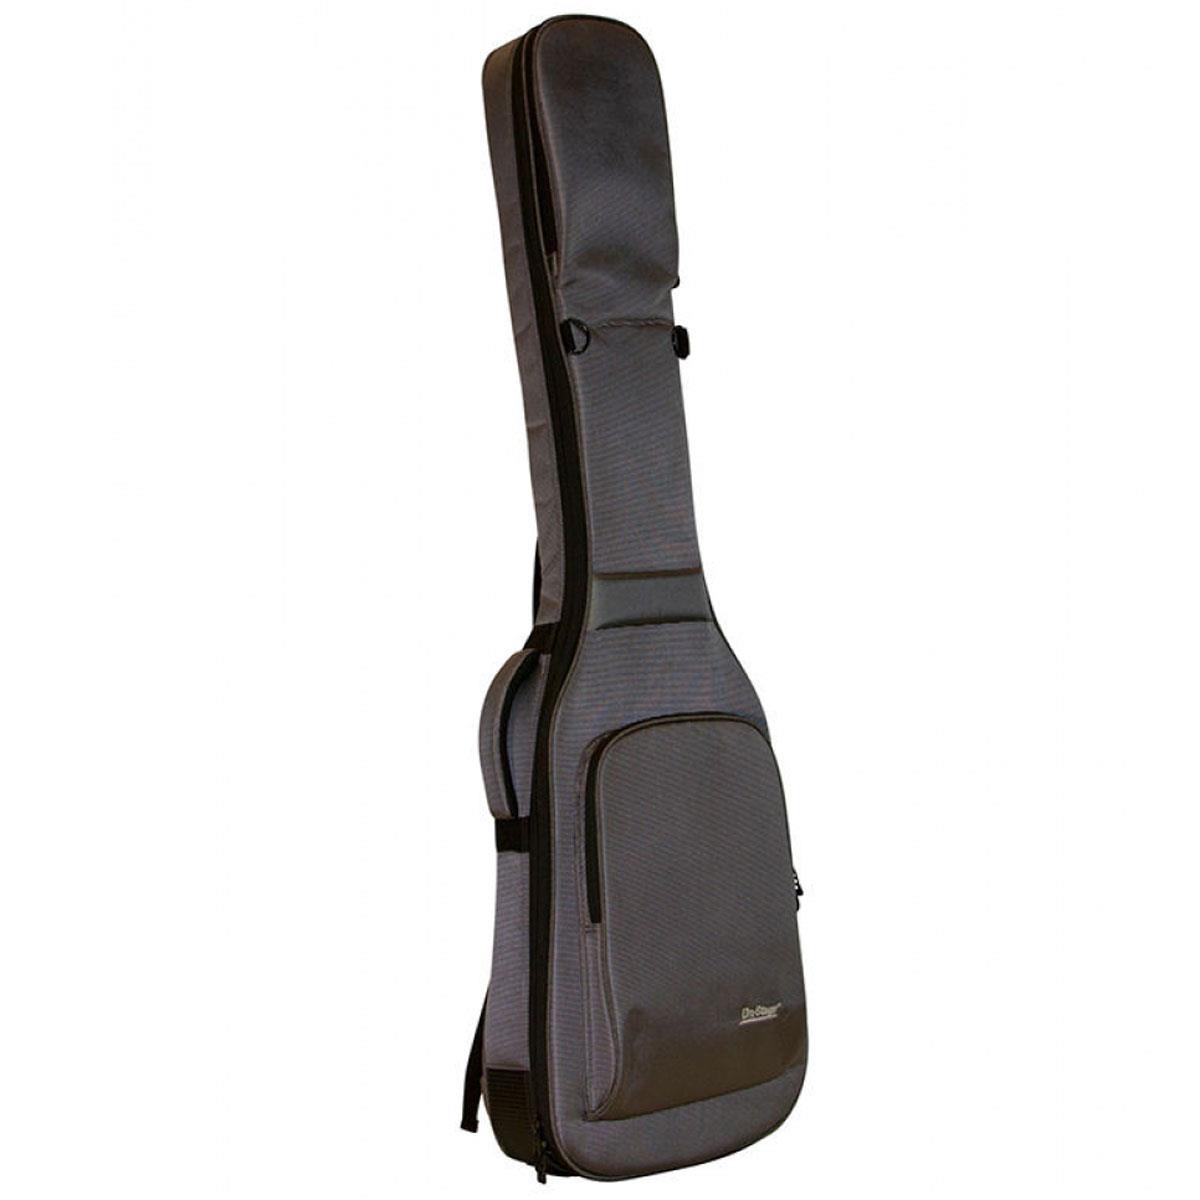 On-Stage GBB4990 Deluxe Bass Guitar Gig Bag, Charcoal Gray -  14578